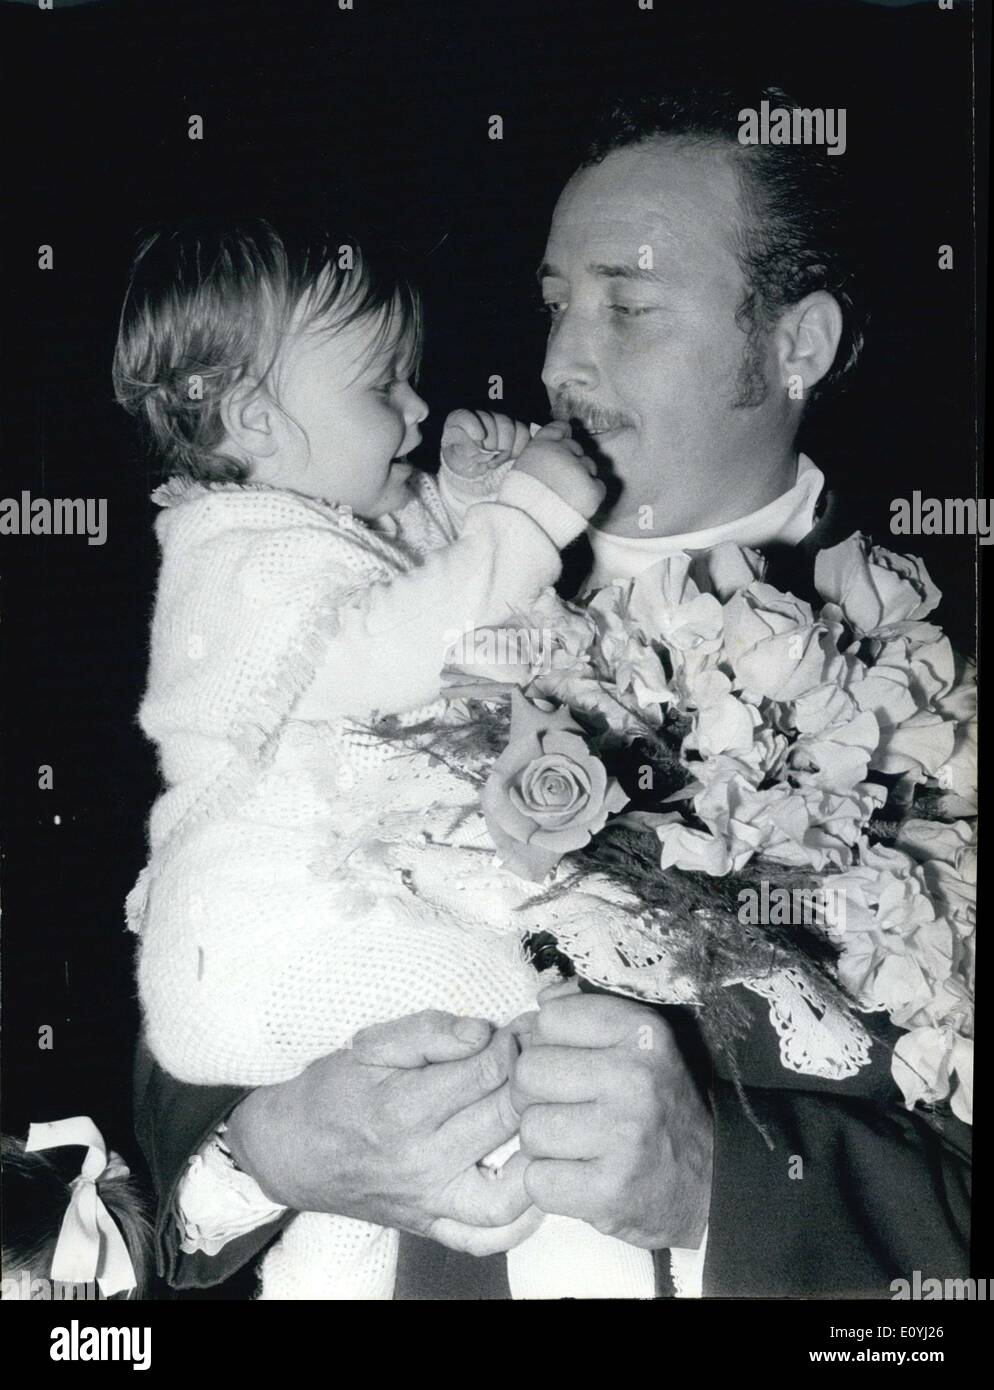 Jun. 17, 1970 - Father of the Year: Mercier with youngest daughter, Anita Stock Photo